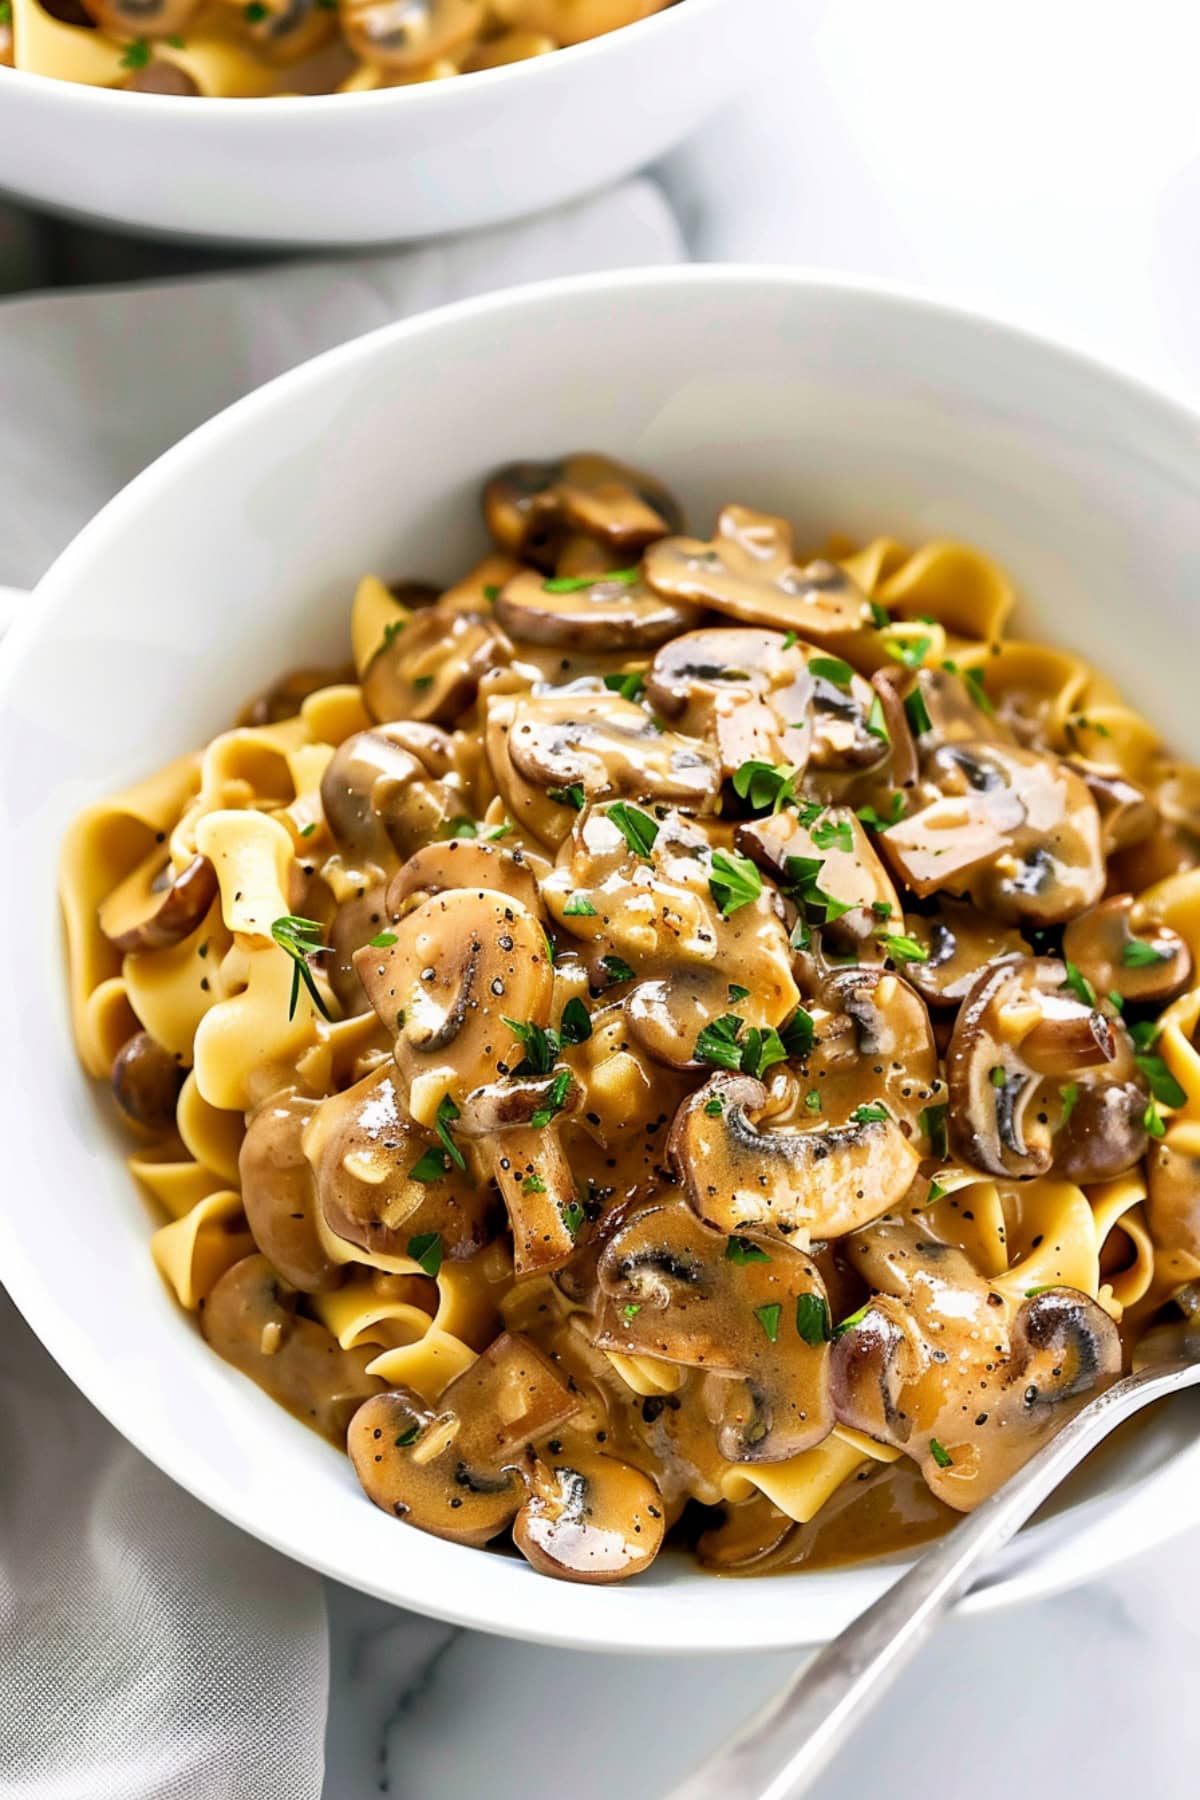 A close-up of a creamy mushroom stroganoff served over a bed of egg noodles, garnished with fresh parsley.